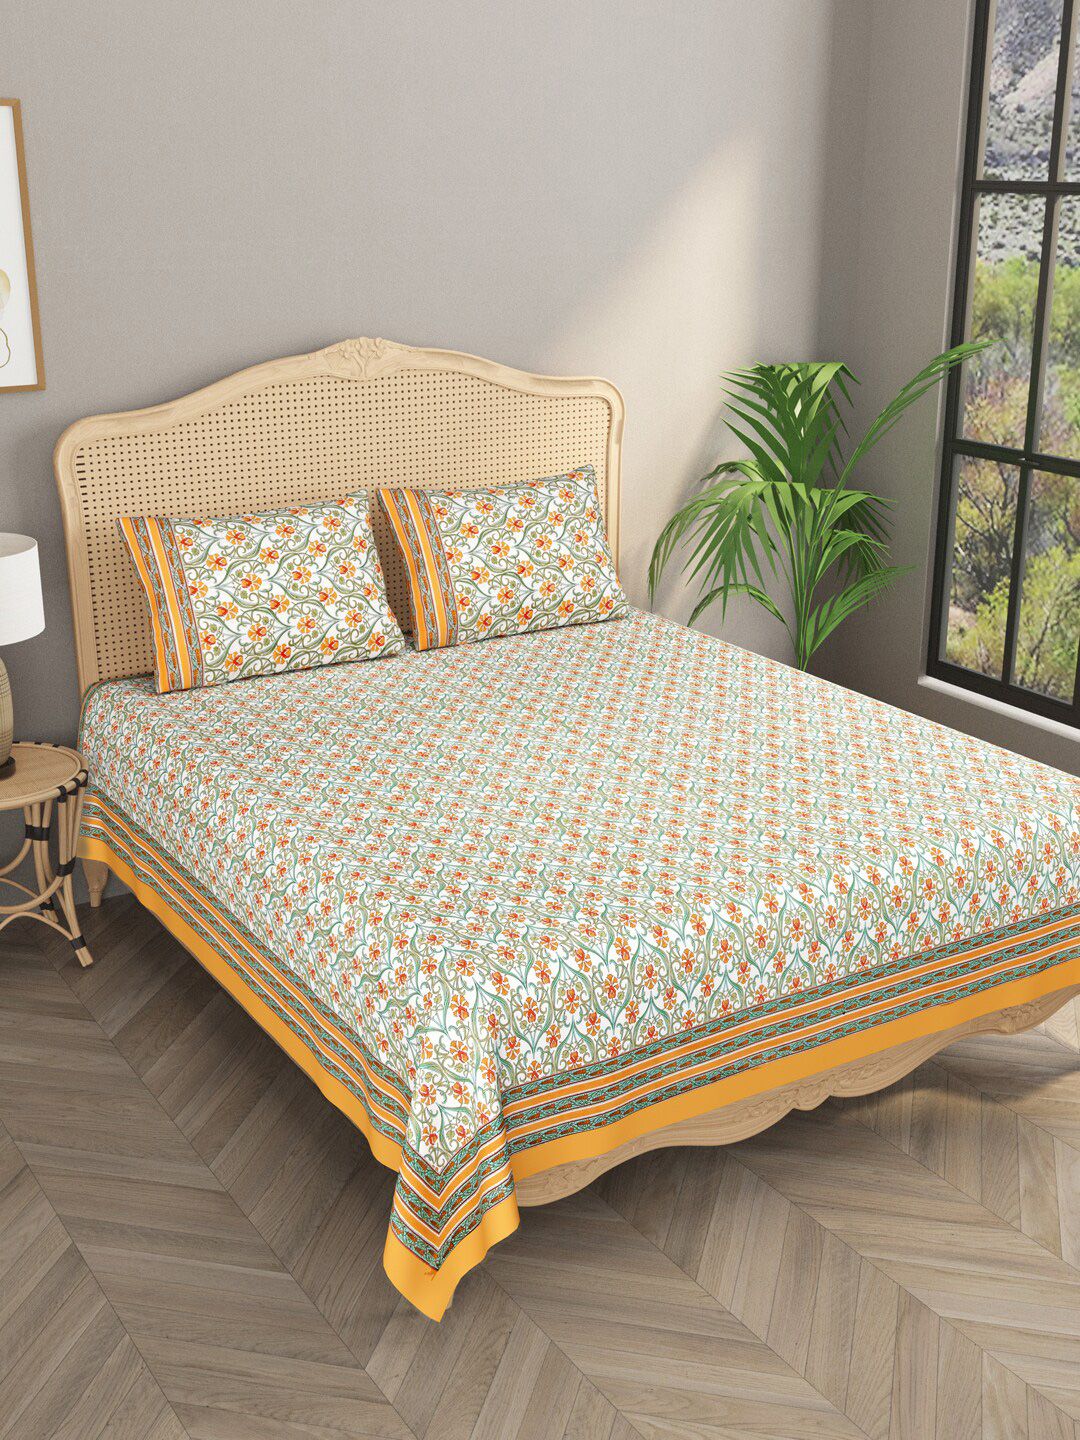 Gulaab Jaipur Yellow & White Ethnic Motifs 600 TC King Bedsheet with 2 Pillow Covers Price in India